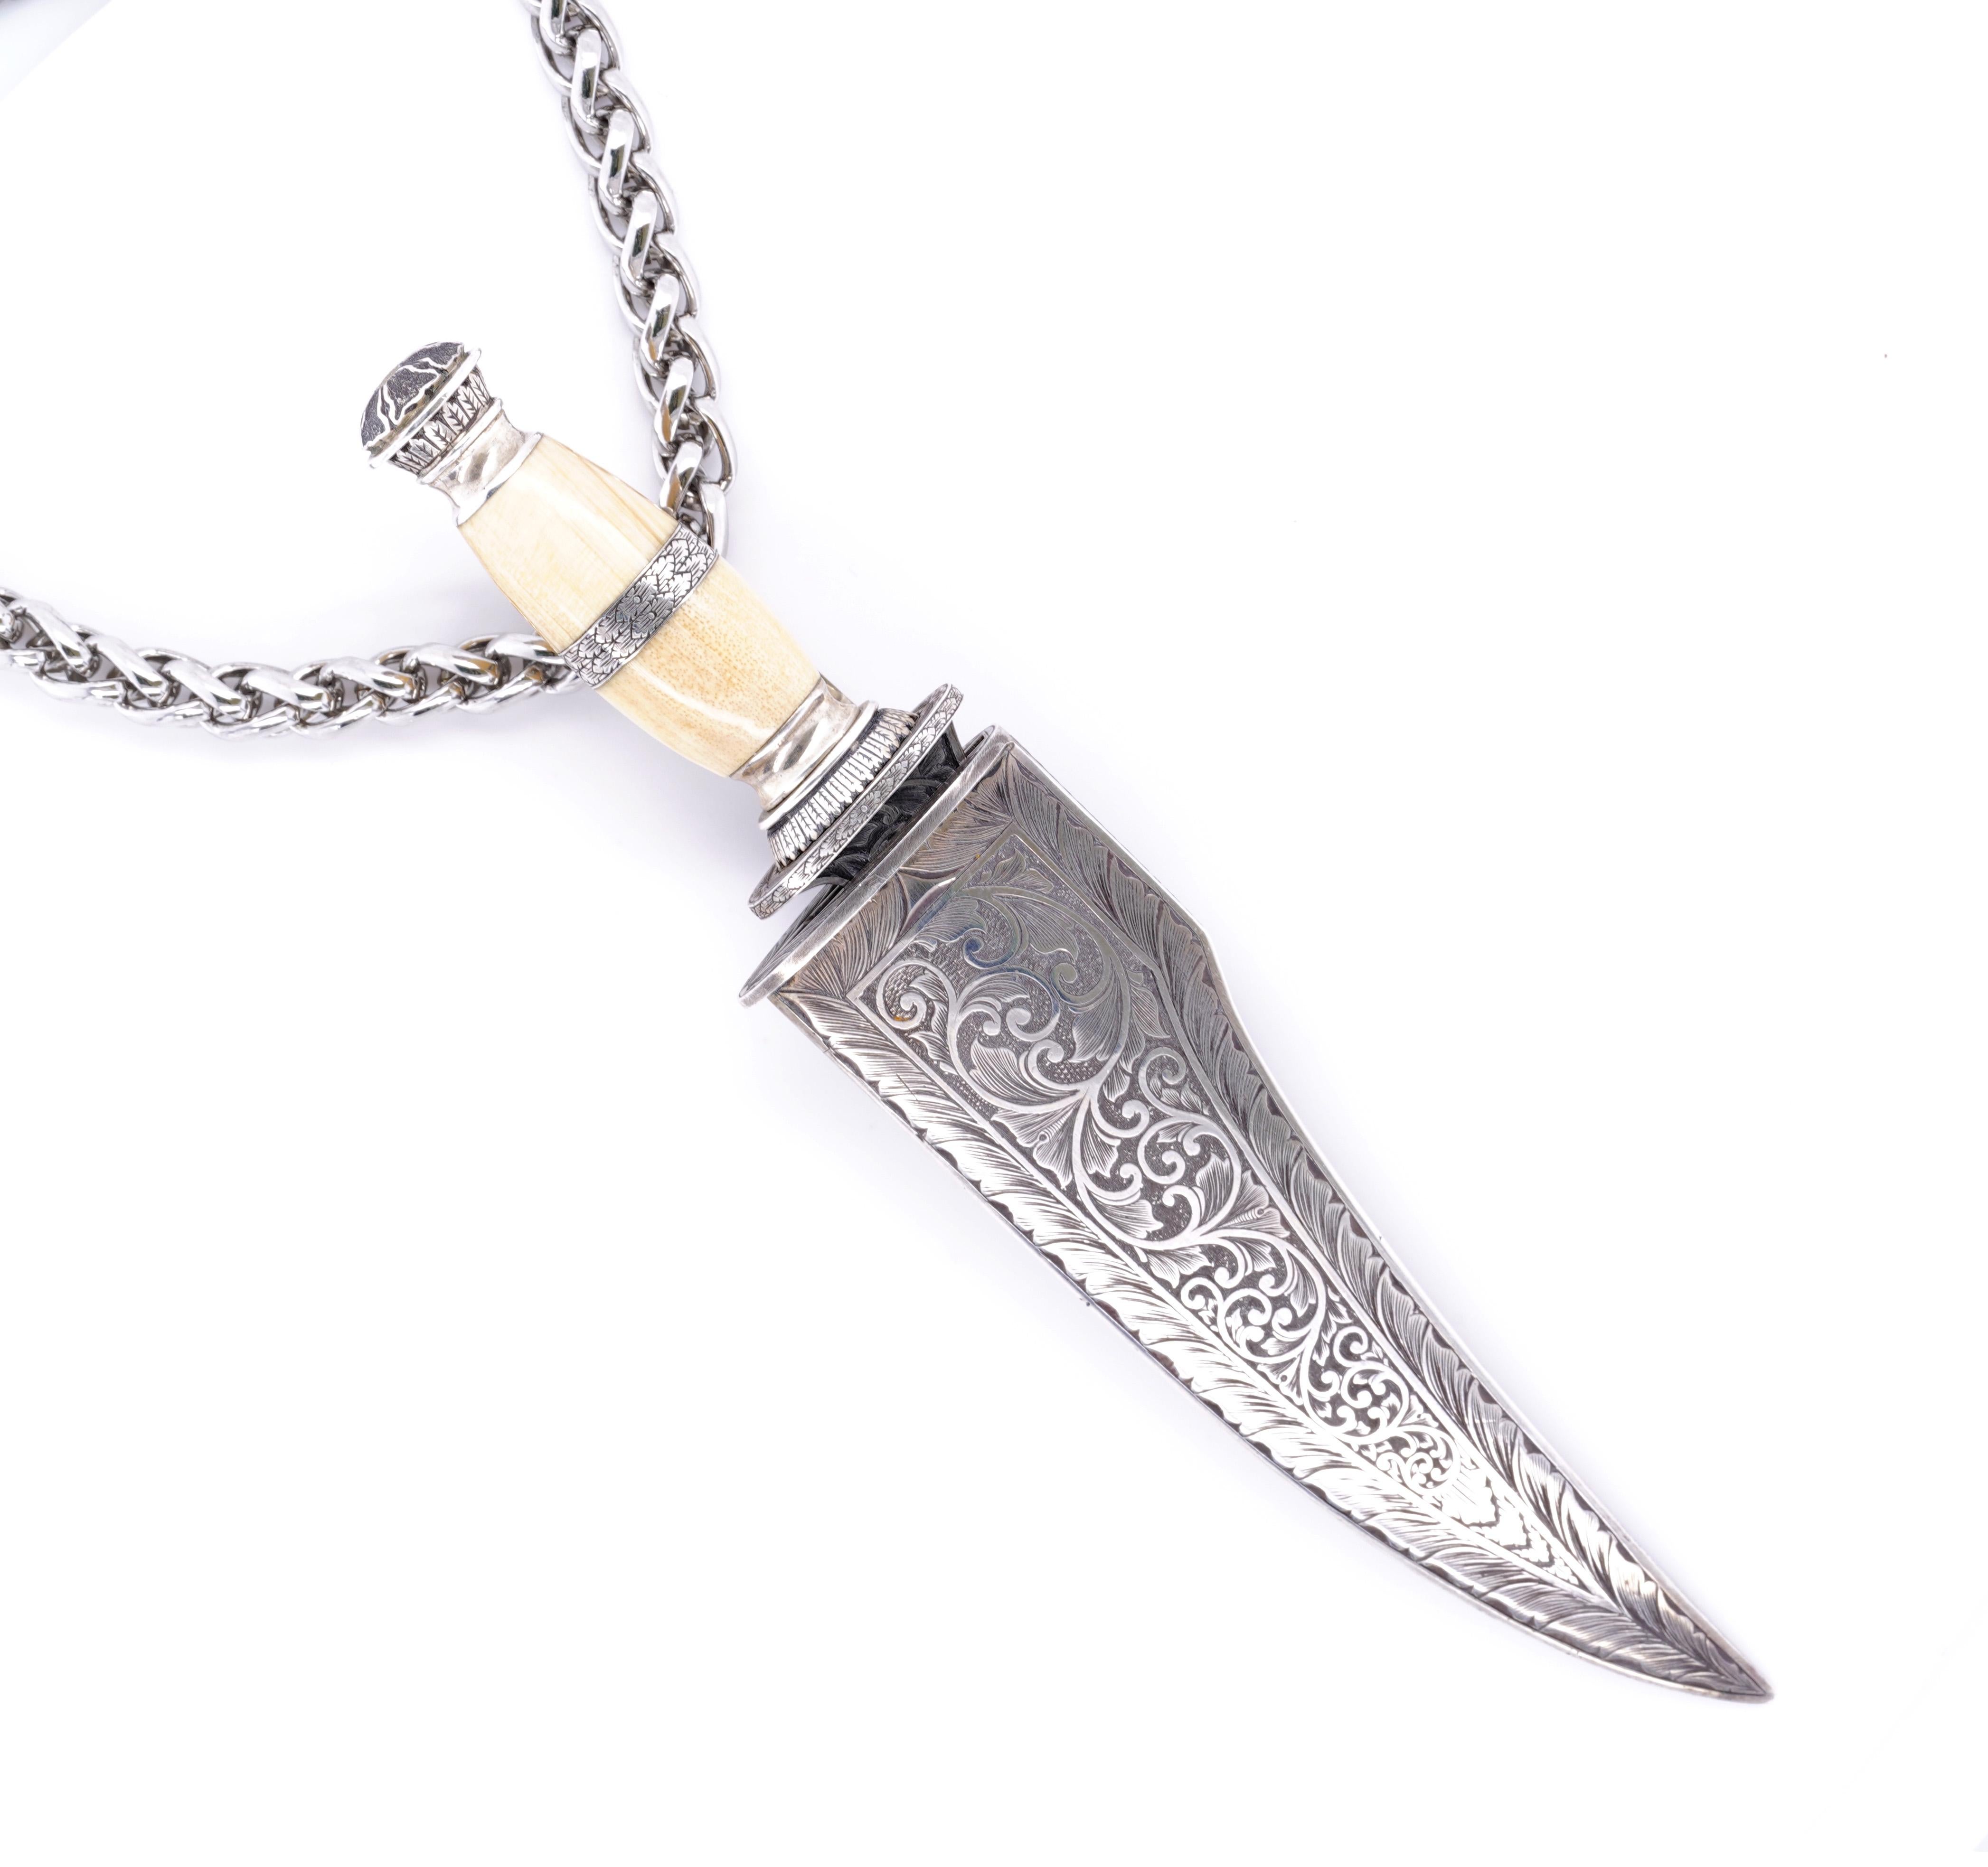 Victorian Mint, Miniature Bowie Knife with Sterling Silver Sheath by Jim Whitehead